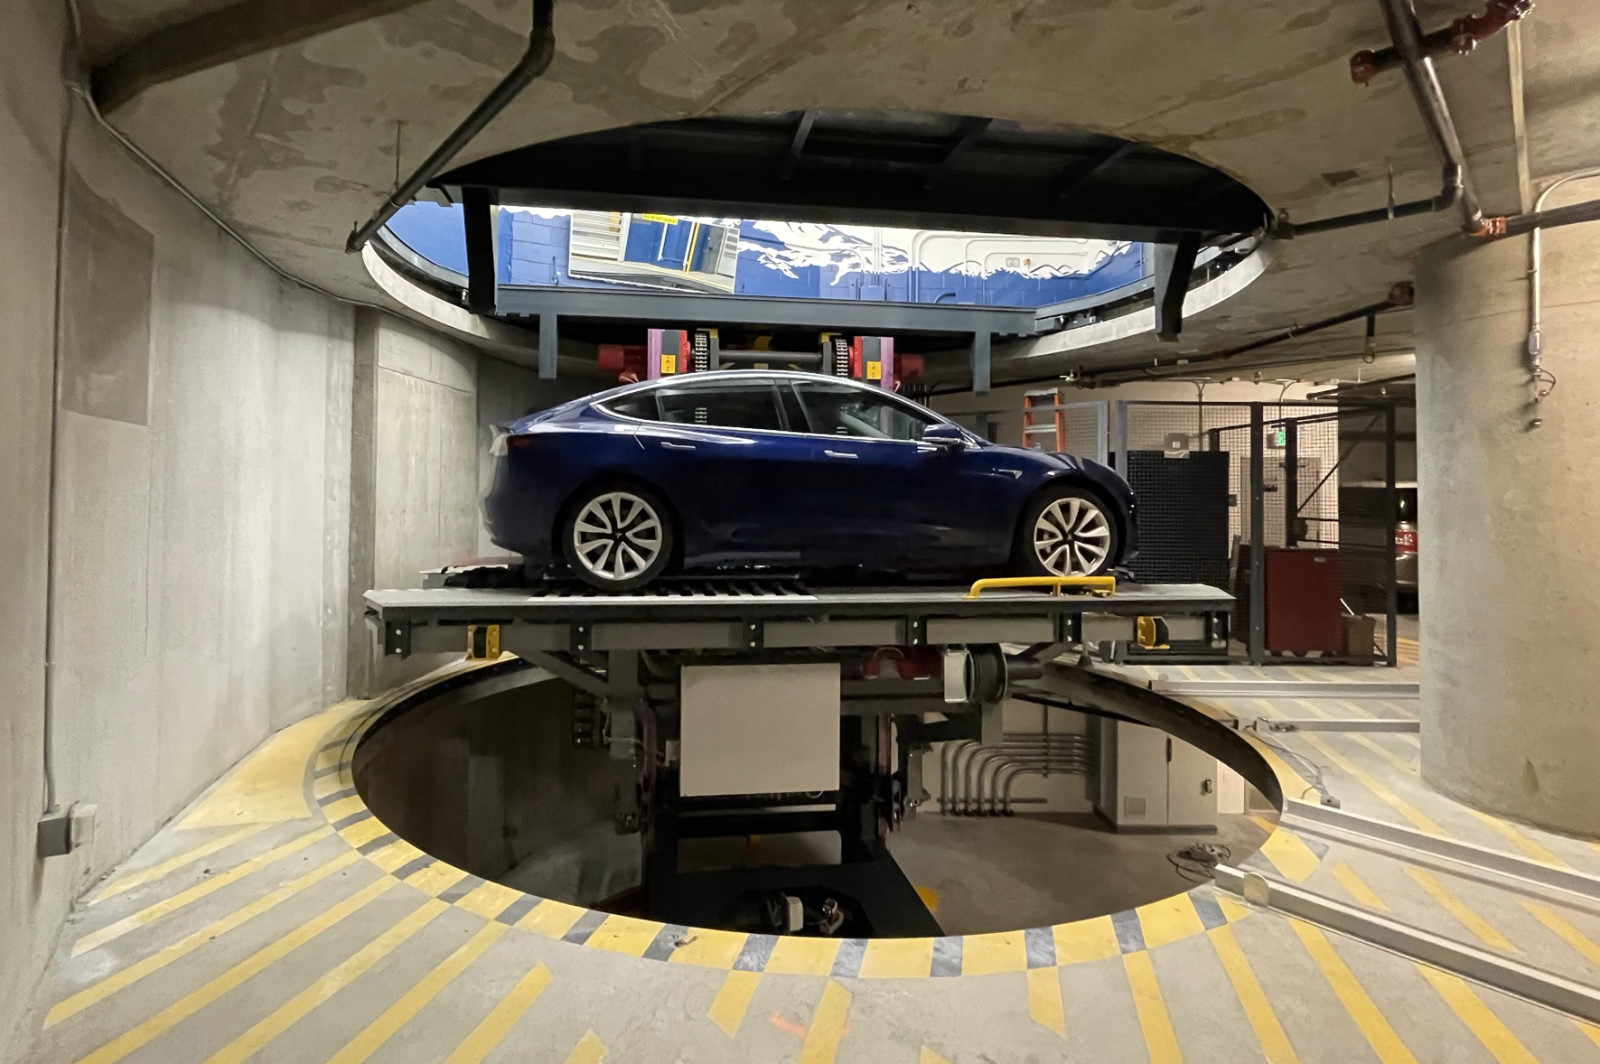 KUOW - Seattle's first robotic parking